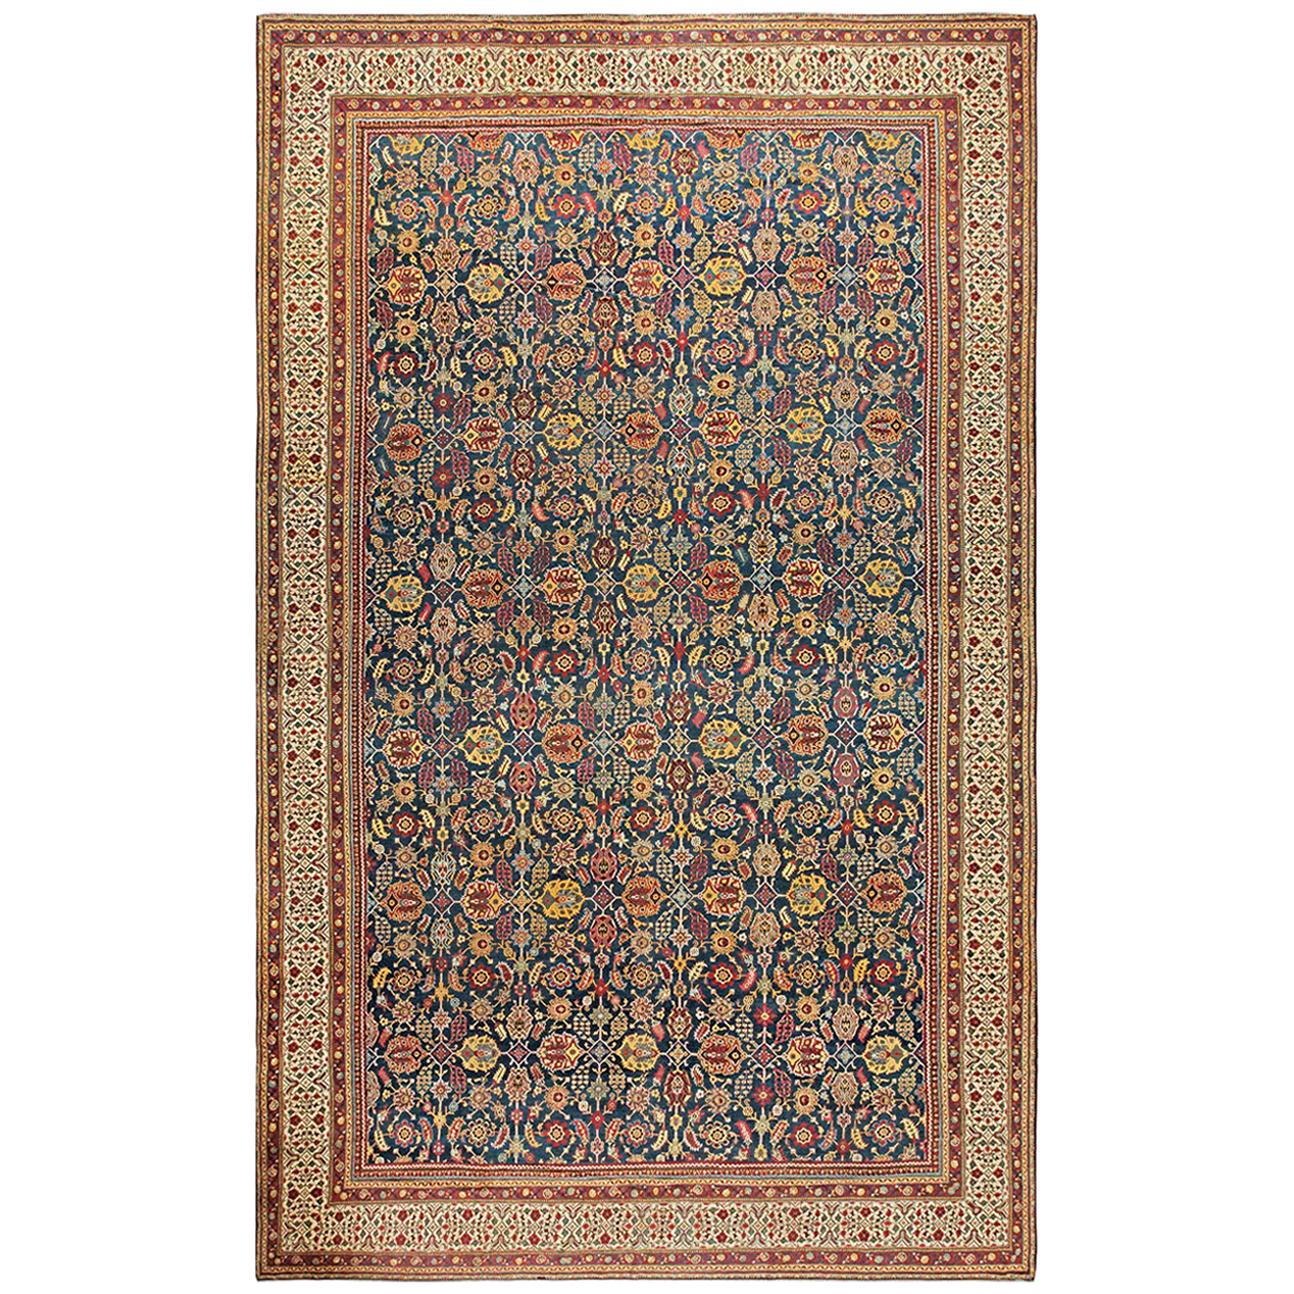 Oversized Antique North Indian Handmade Wool Rug